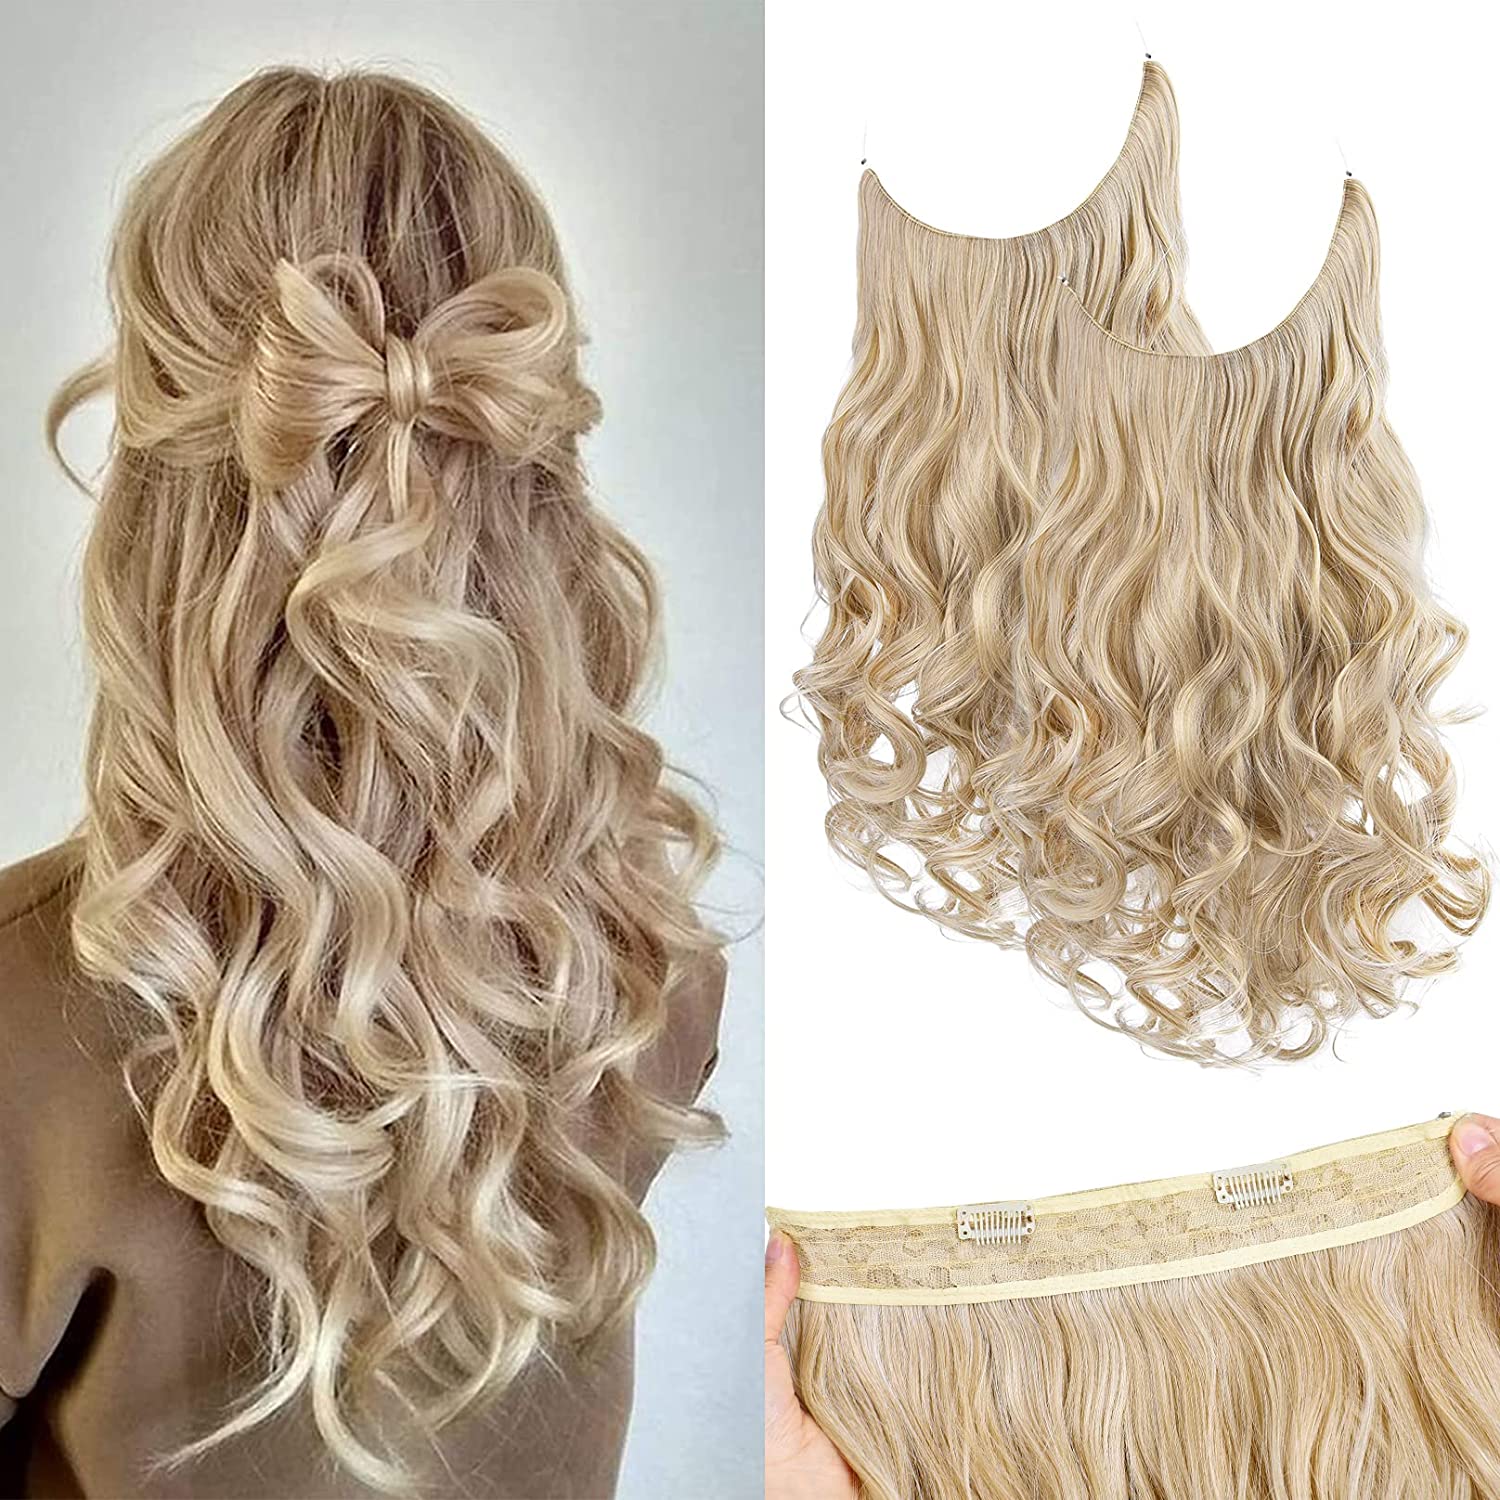 REECHO 2PCS Set Invisible Wire Hair Extensions, Long Thick Hairpieces Transparent Headband Removable Secure Clips in Curly Wavy Secret Hairpiece for Women